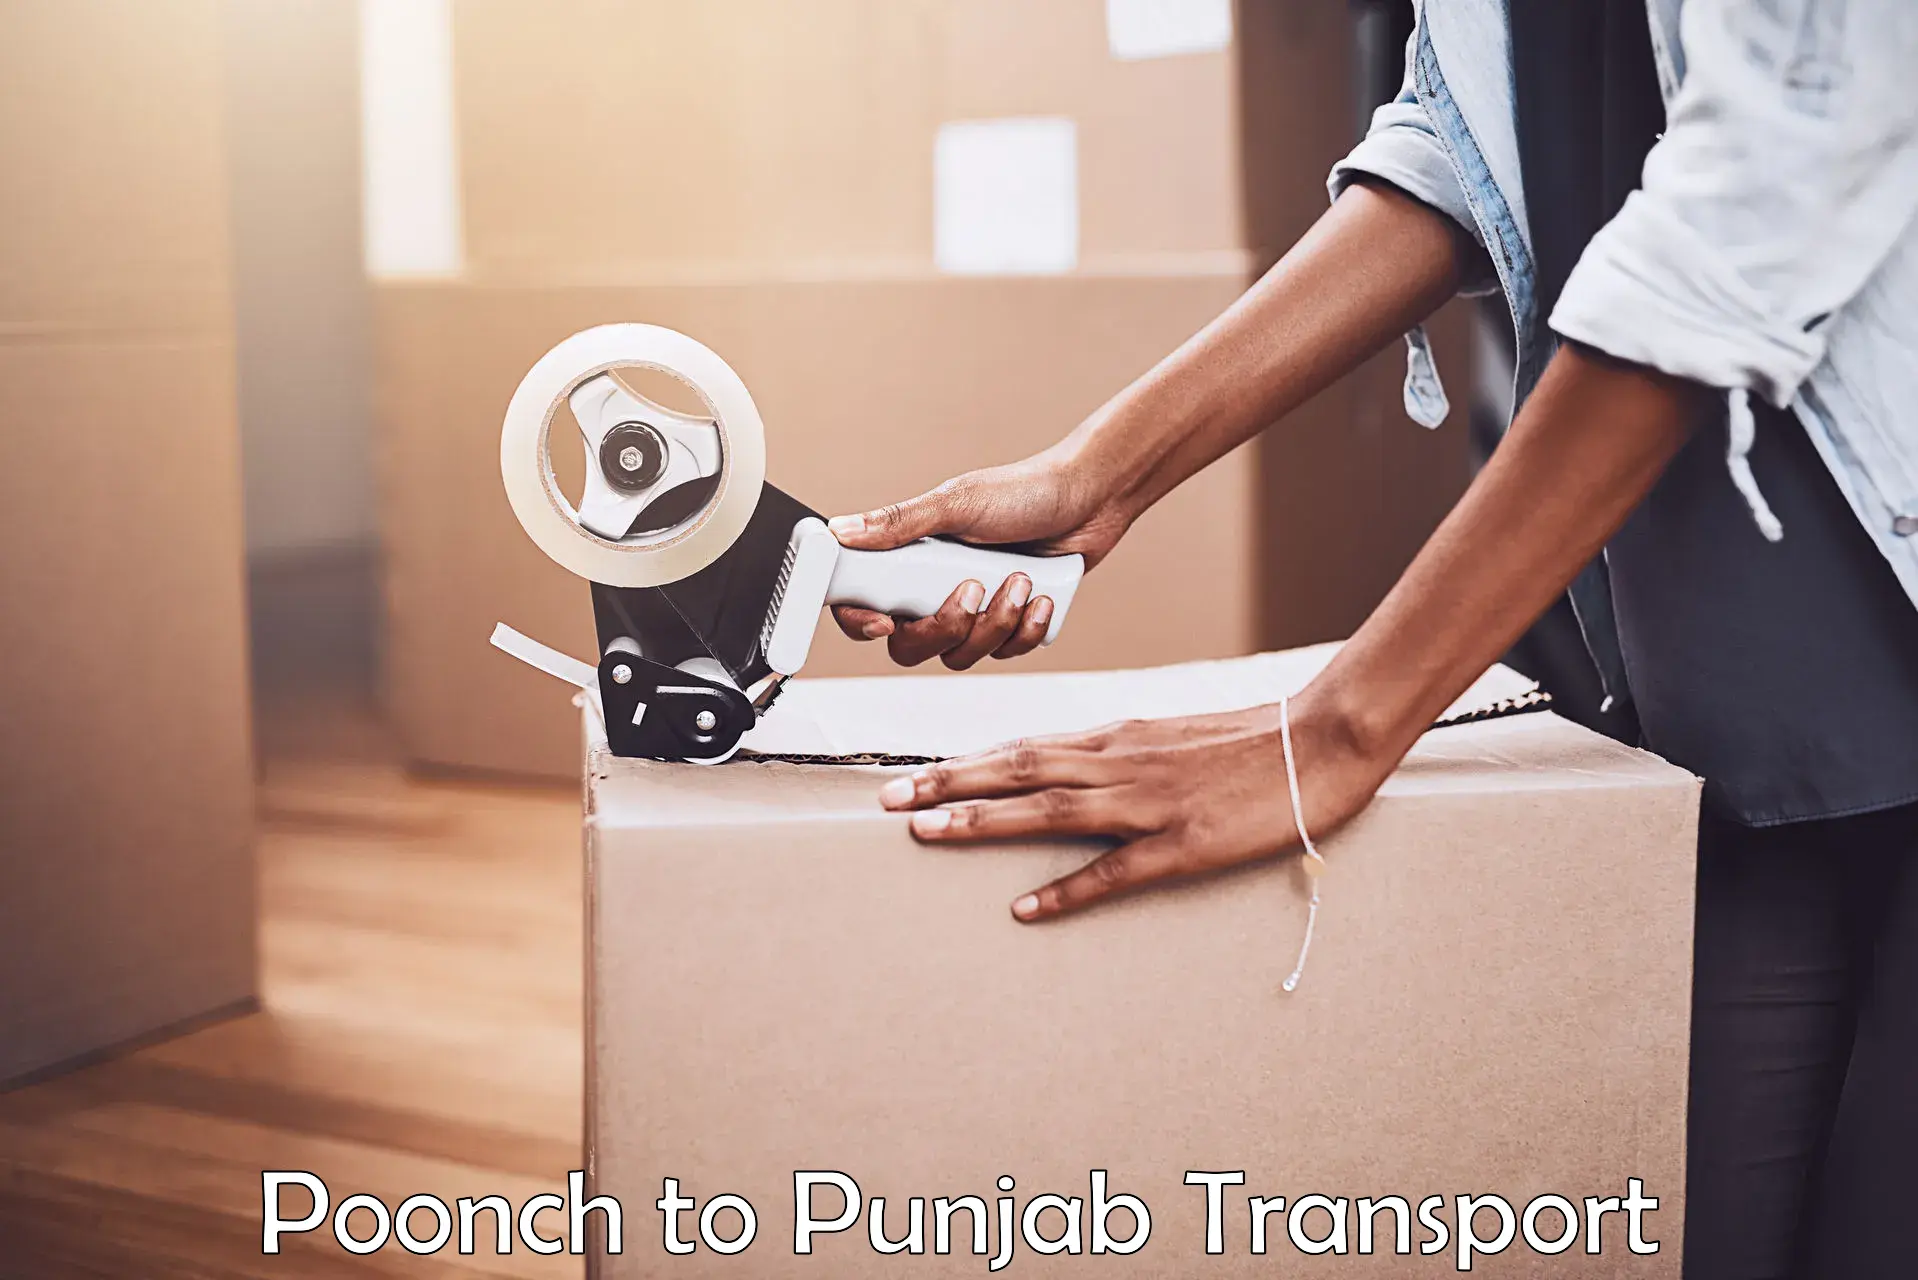 Daily transport service Poonch to Pathankot